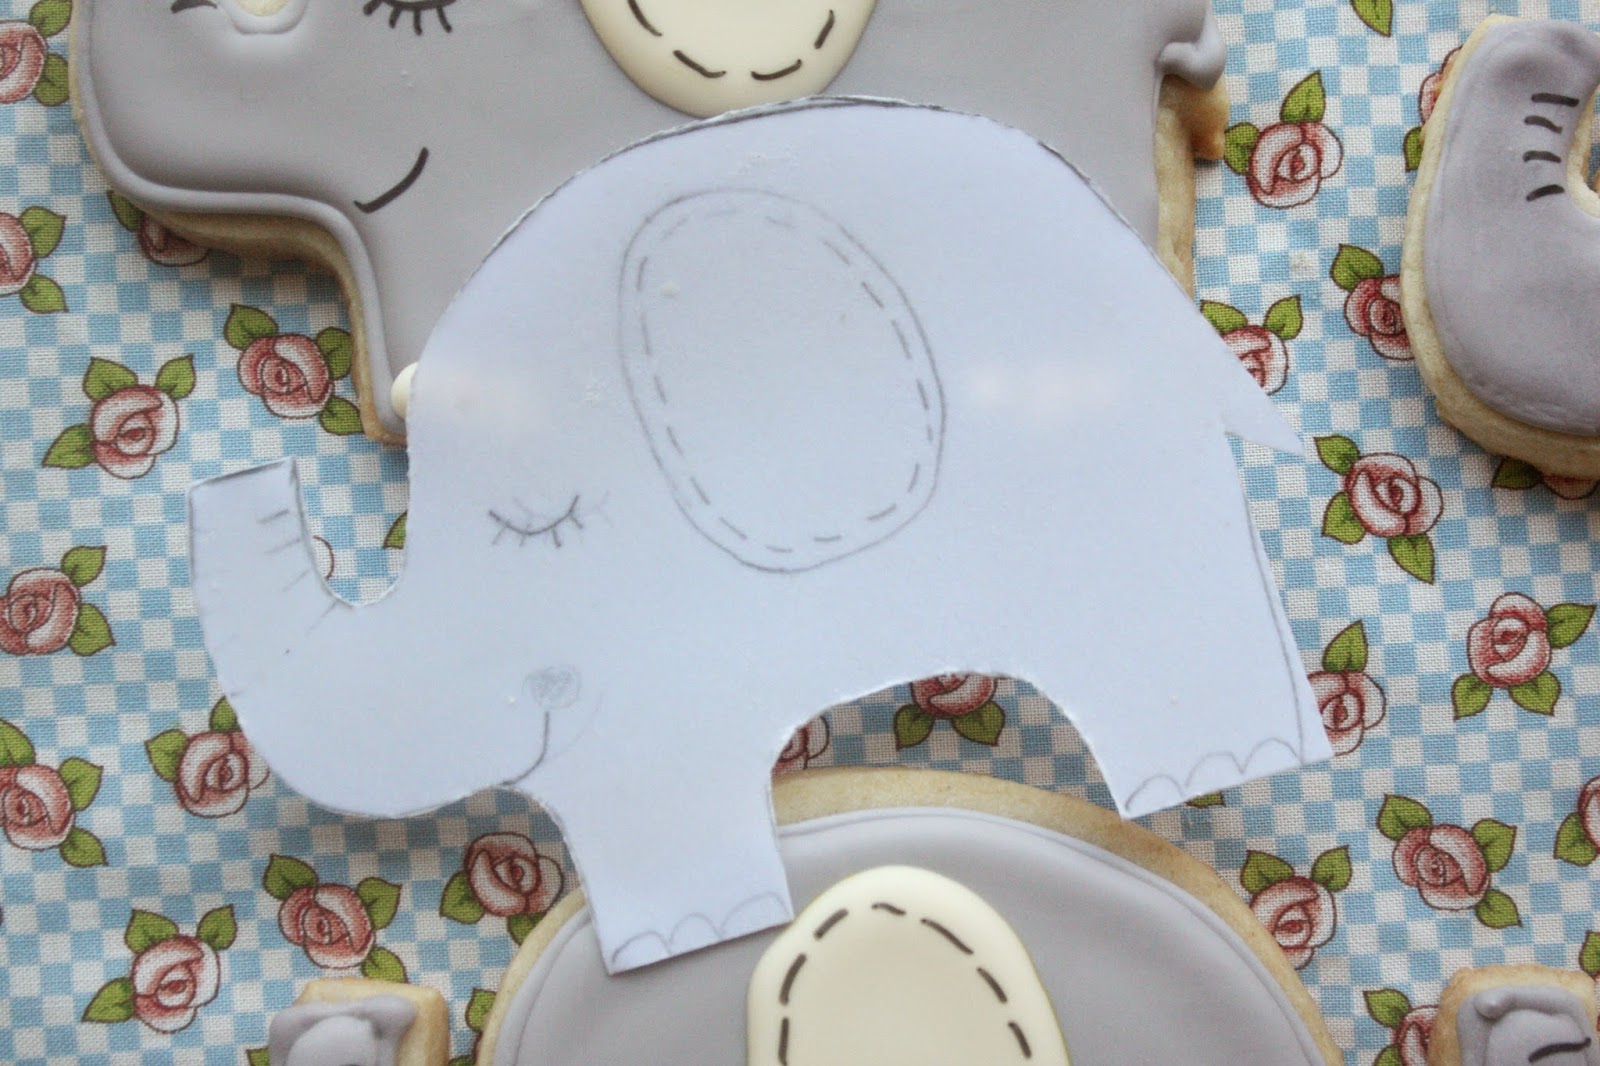 Elephant Cookies and Simply Perfect Party Cakes for Kids, Lay The Table